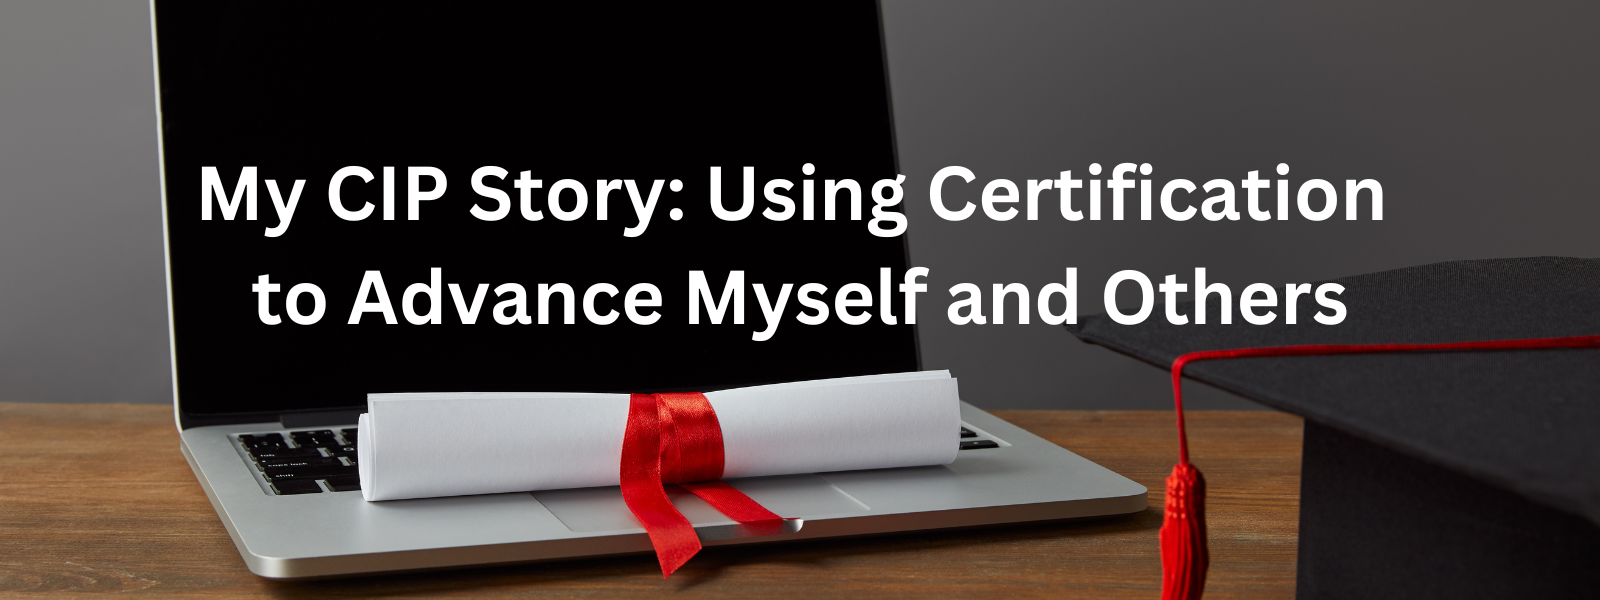 My CIP Story: Using Certification to Advance Myself and Others